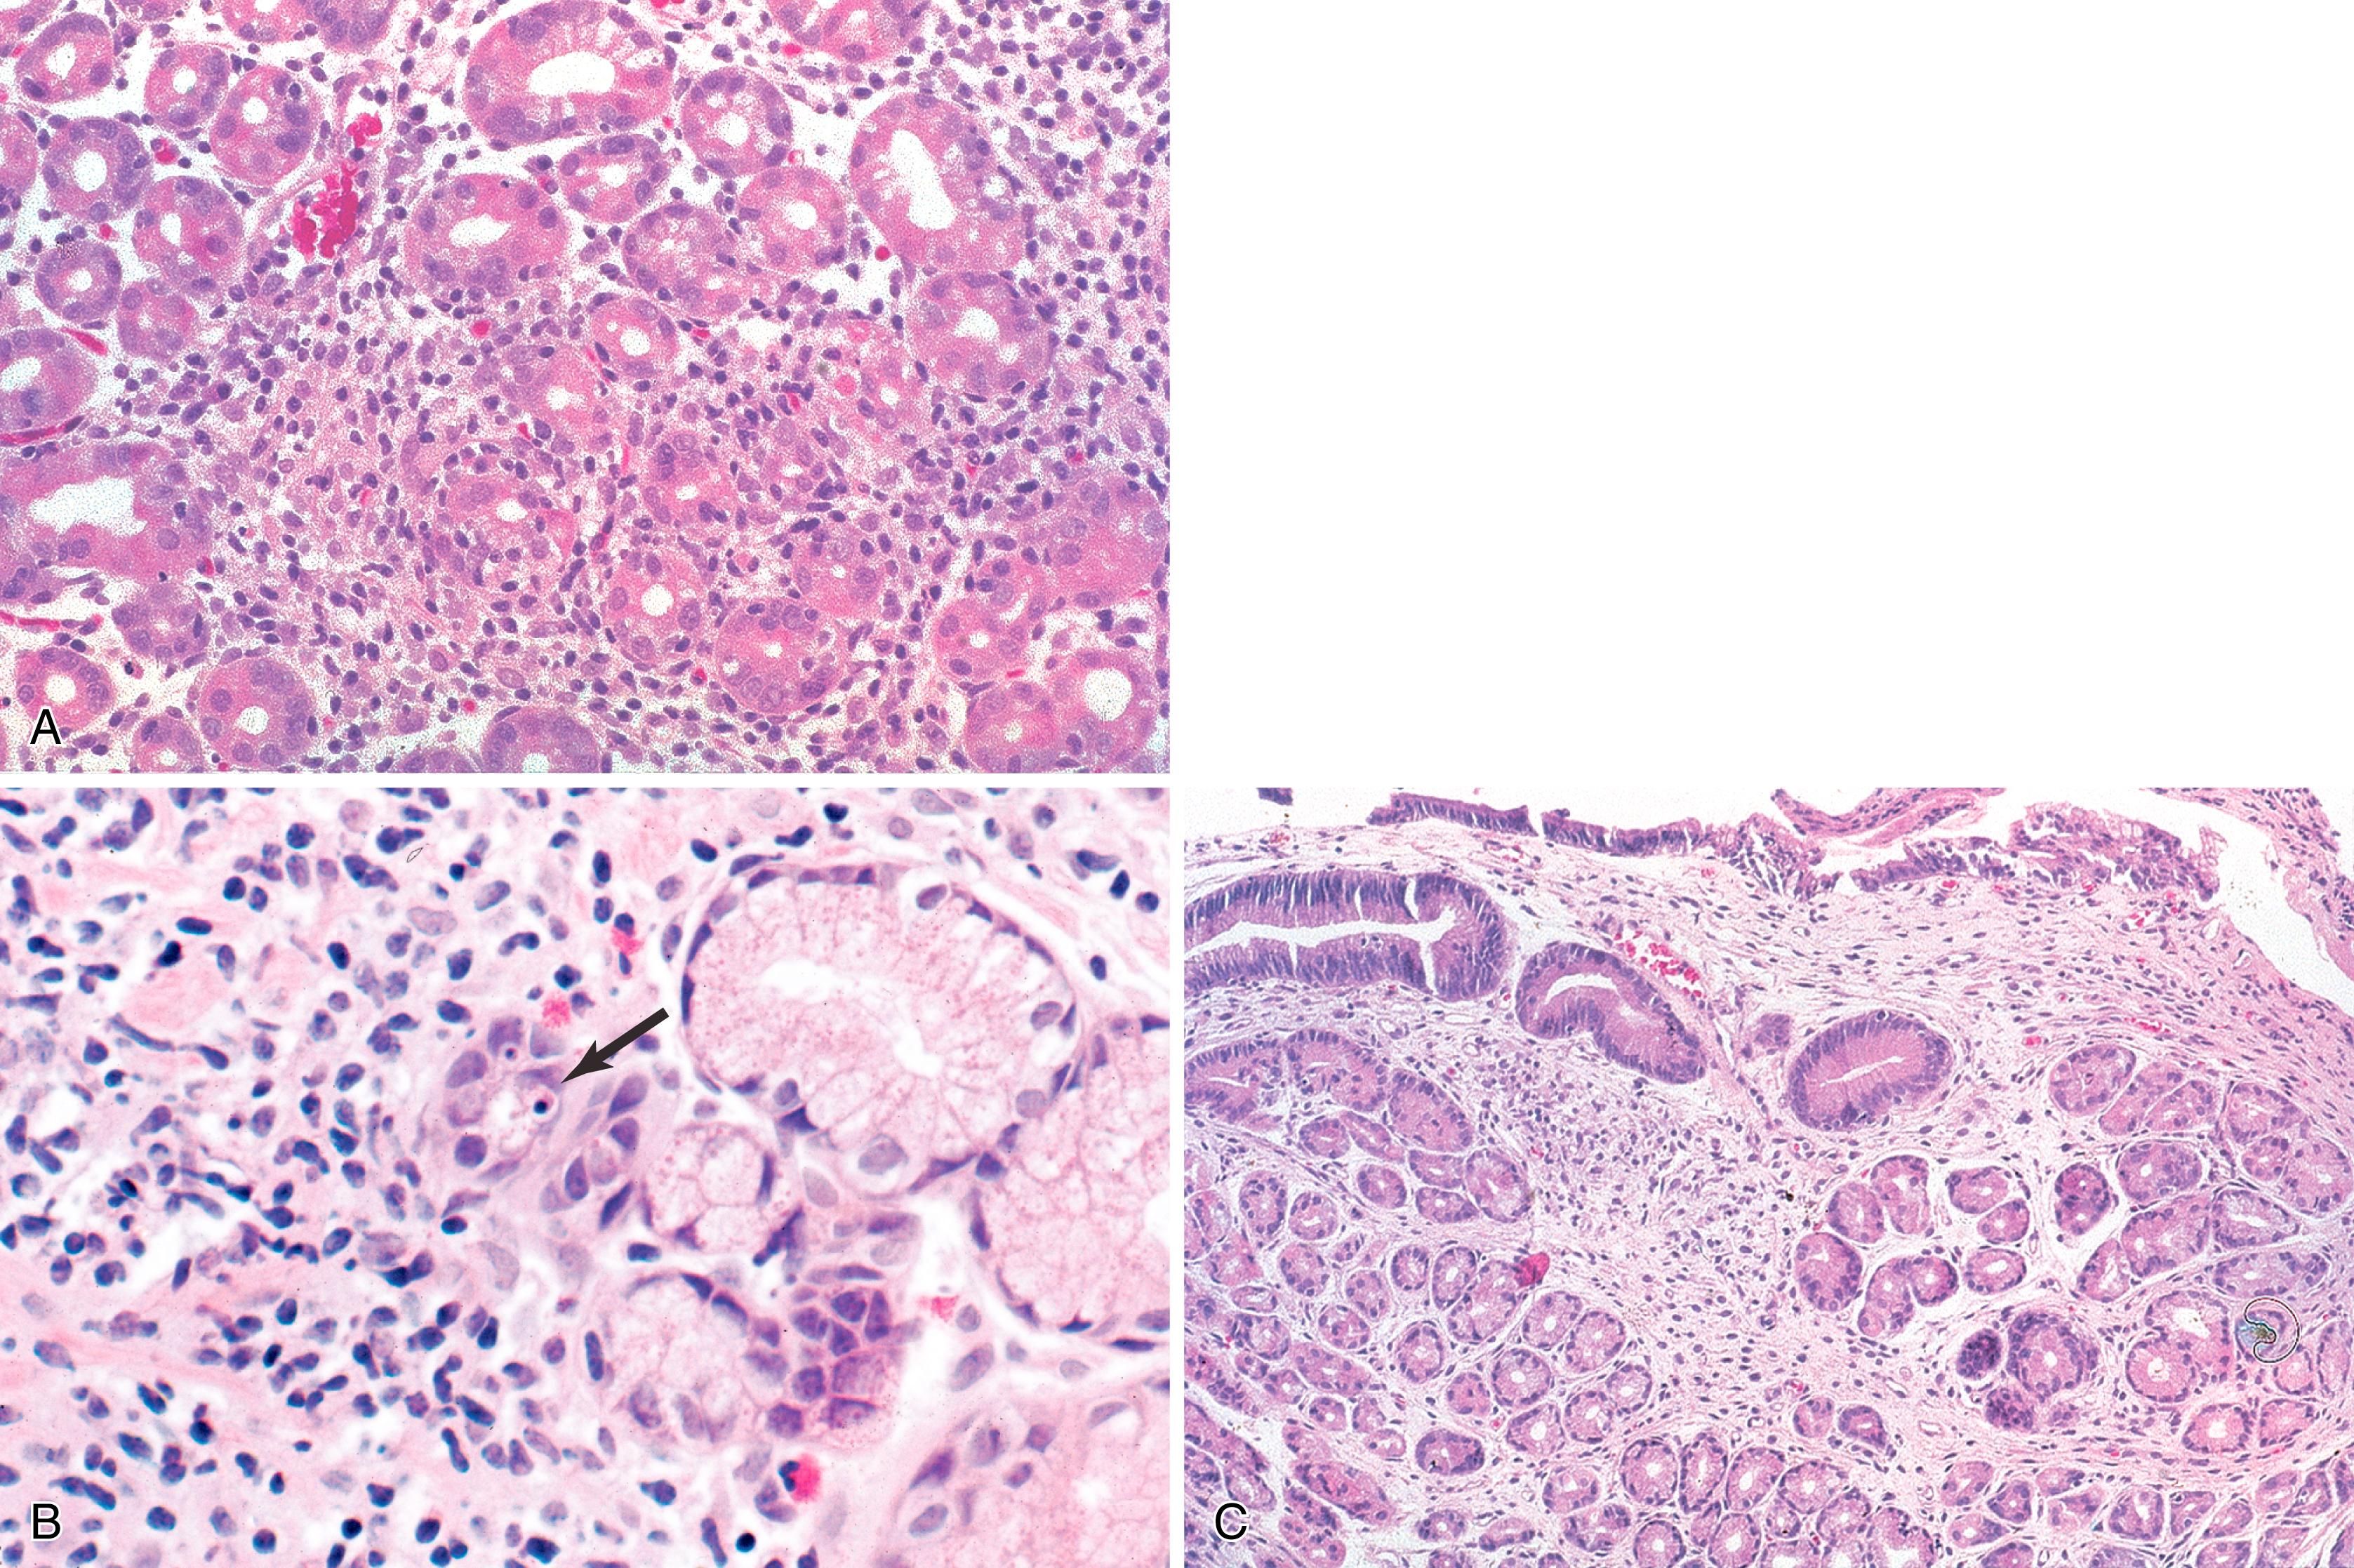 FIGURE 5.3, A, In common variable immunodeficiency (CVID), the gastric mucosa often contains a nonspecific mononuclear cell infiltrate. B, Notice the apoptotic body (arrow) and the absence of plasma cells. C, Loss of gastric glands leads to atrophic gastritis at a young age in patients with CVID. Loss of parietal cells results in pernicious anemia and may occur in the absence of antiparietal cell antibodies (H&E stain).